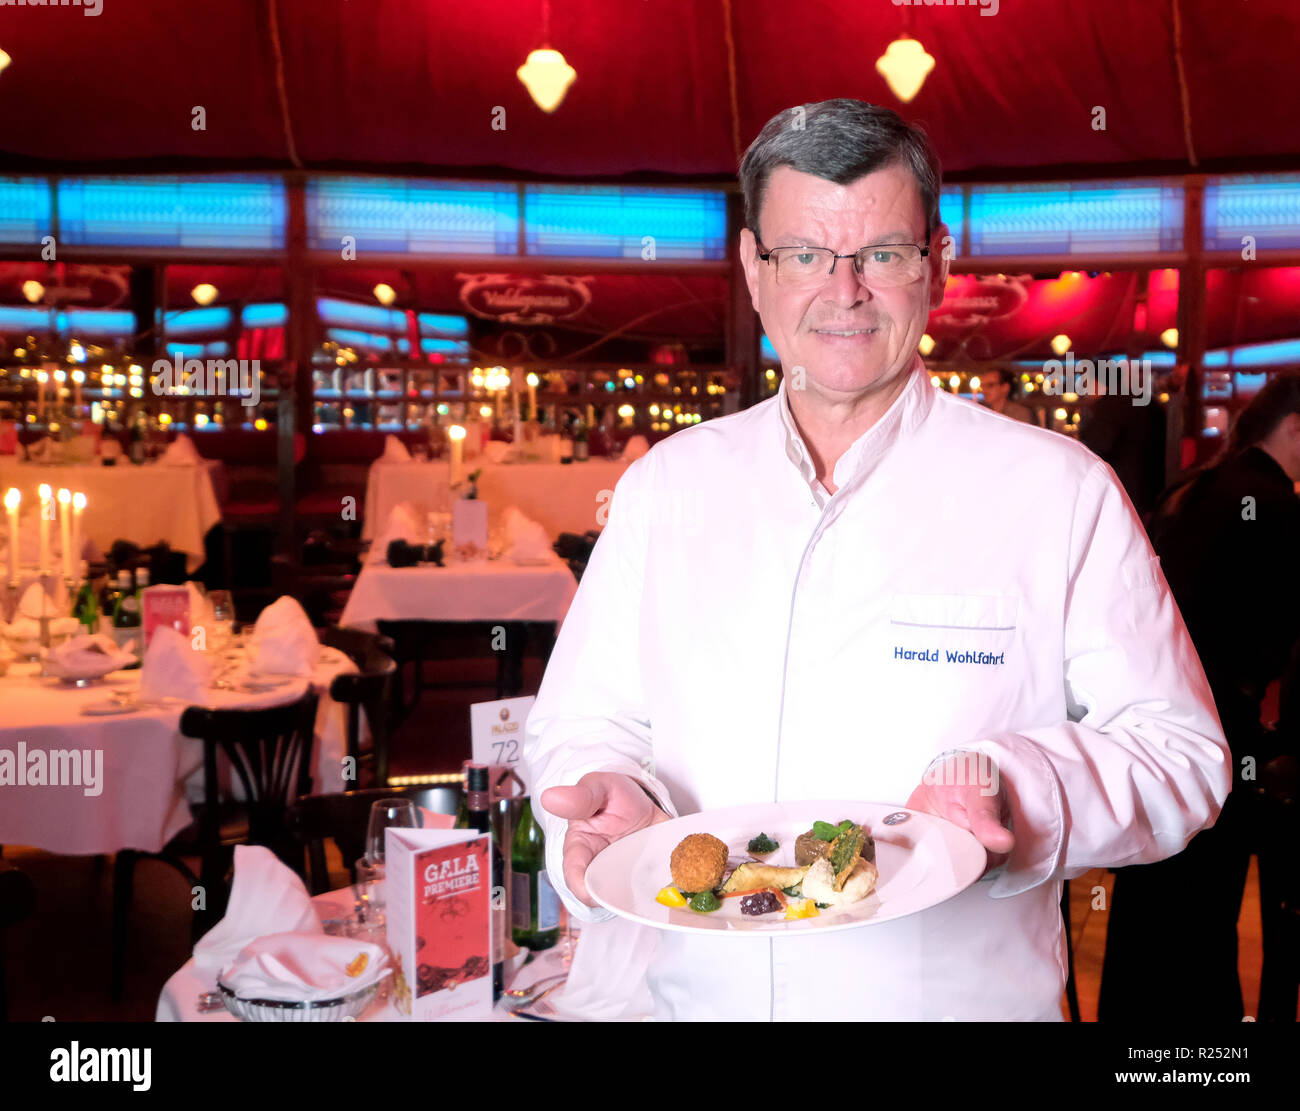 Stuttgart, Germany. 15th Nov, 2018. Top chef Harald Wohlfahrt will be at the opening of the new season of the gastronomic show Palazzo with a dessert in the venue. Credit: Bernd Weißbrod/dpa/Alamy Live News Stock Photo